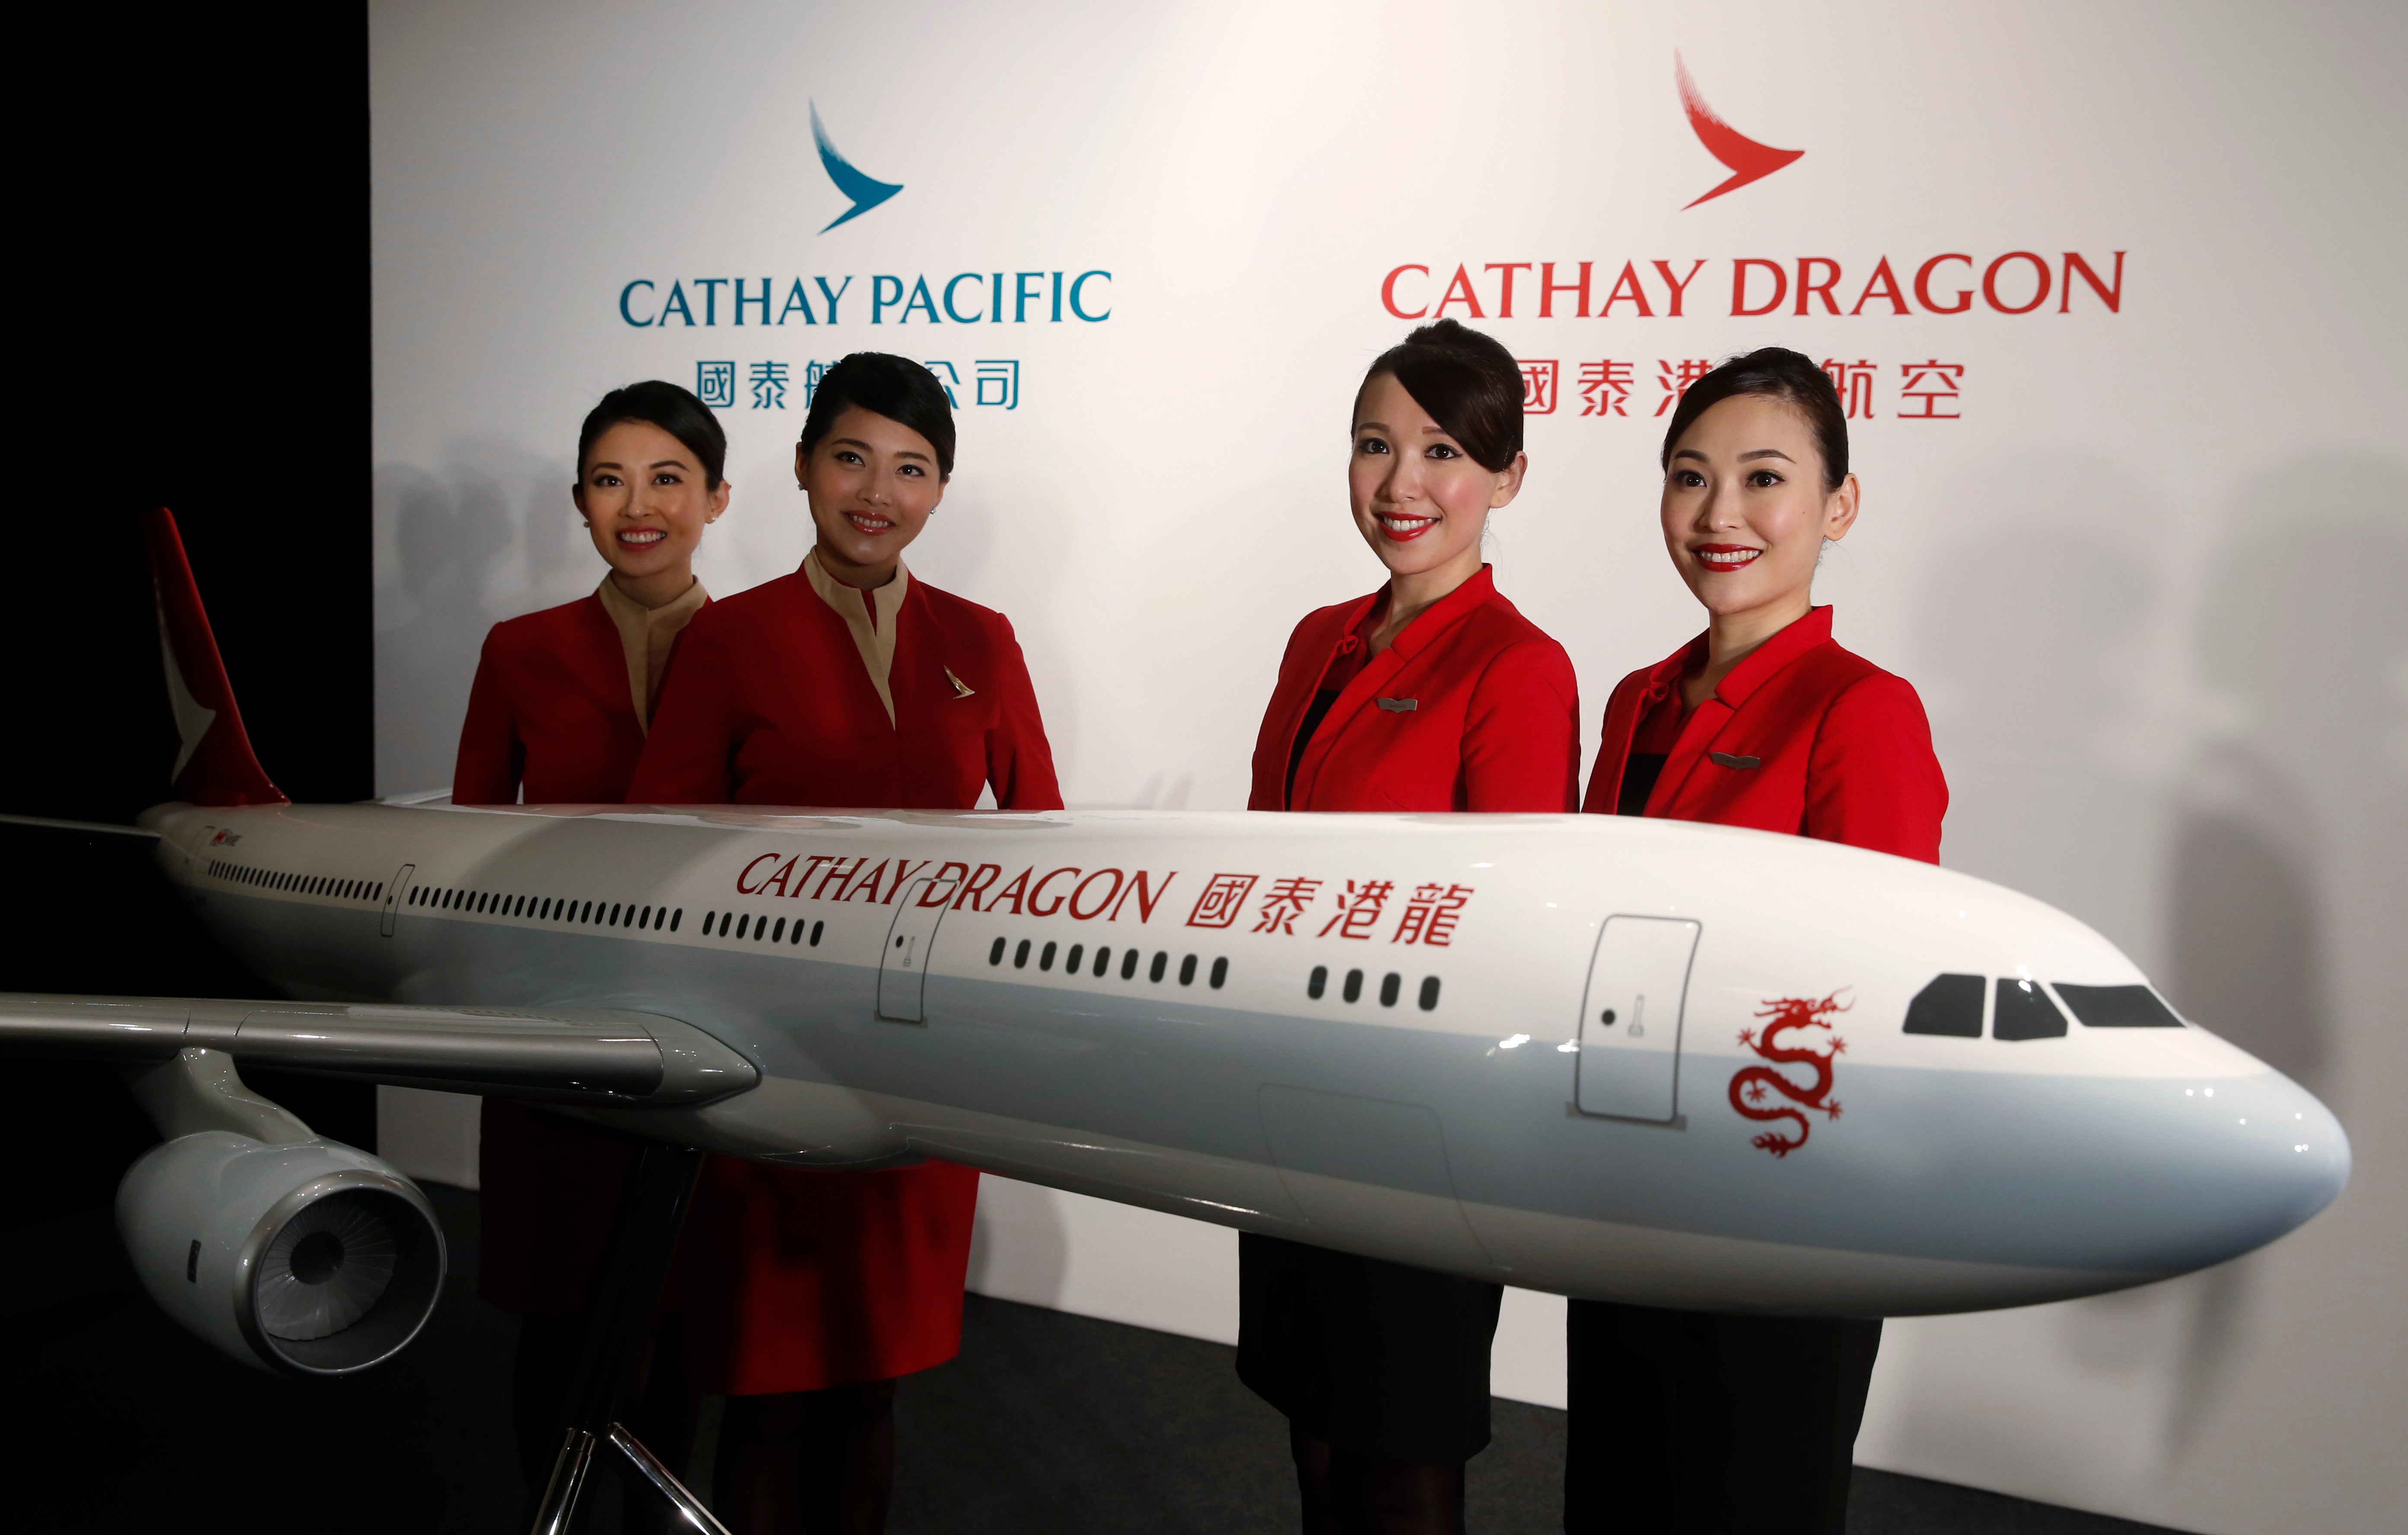 Cathay Pacific crew must adhere to tough rules after travelling abroad